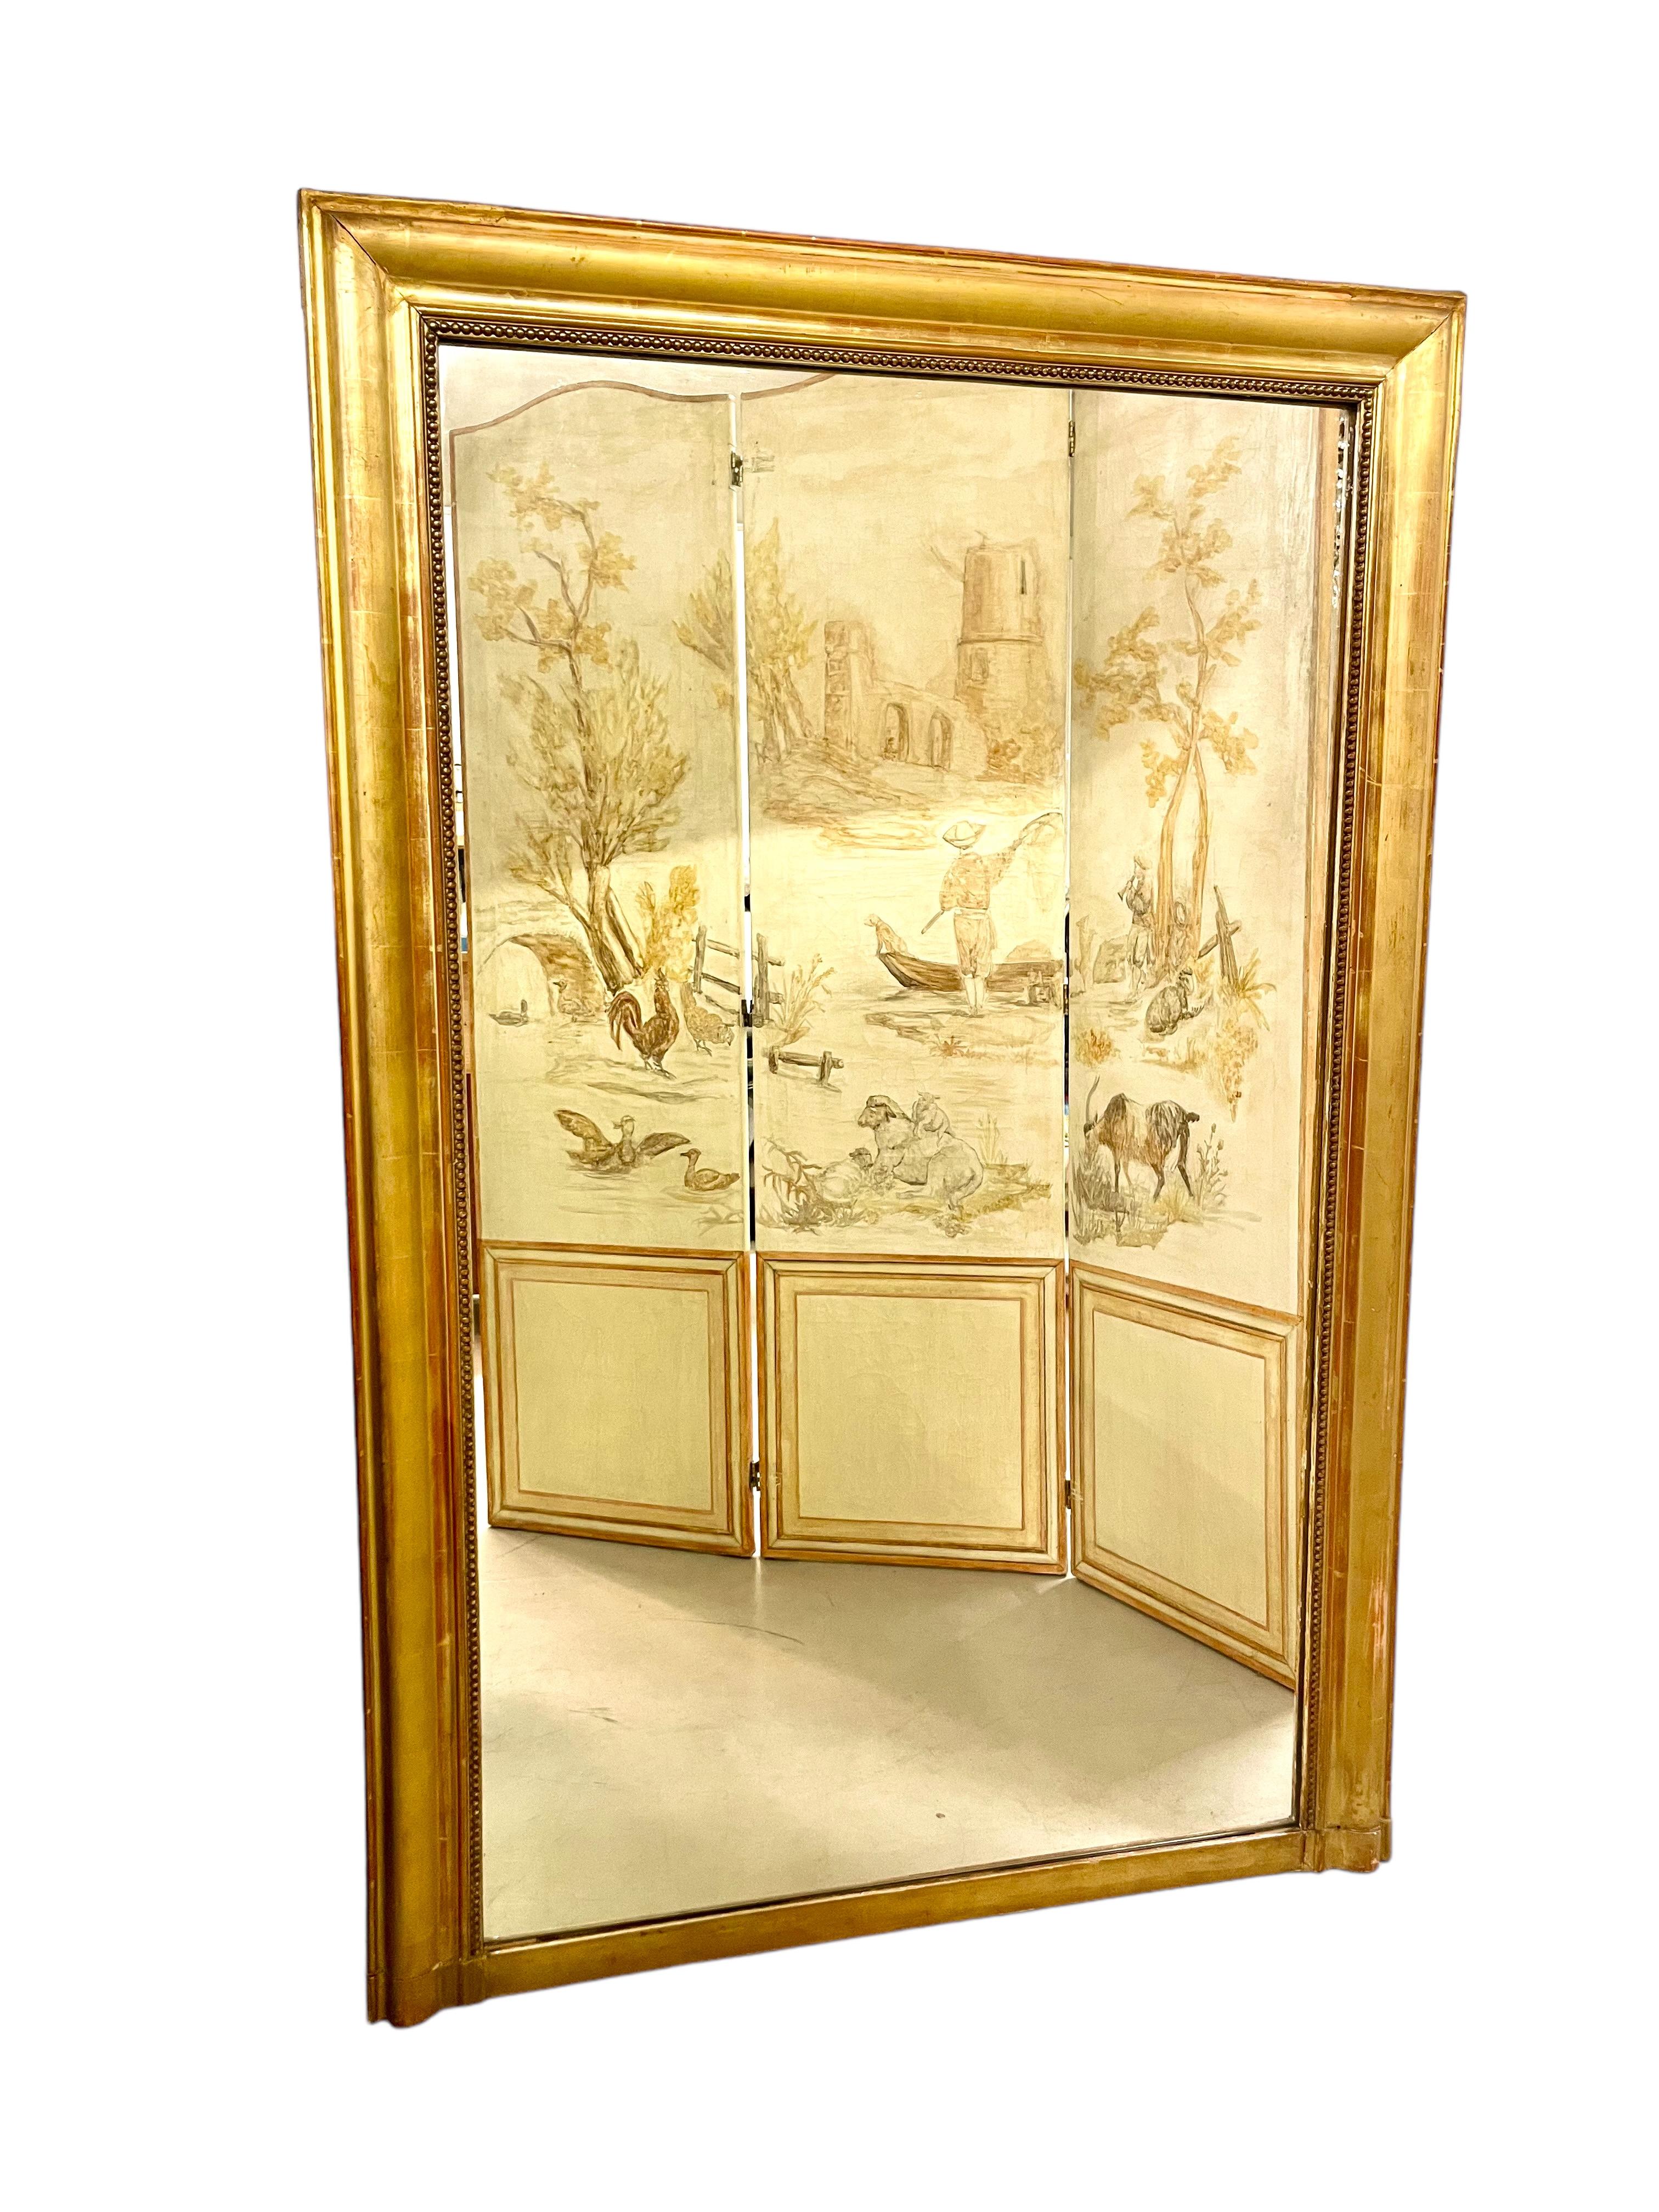 An imposing French 19th century trumeau mirror in wood and gilded stucco, crafted in a neo- classical style. This simple but elegant mirror is enclosed within a fluted giltwood frame, its inner rim edged with a classic 'string of pearls' motif to